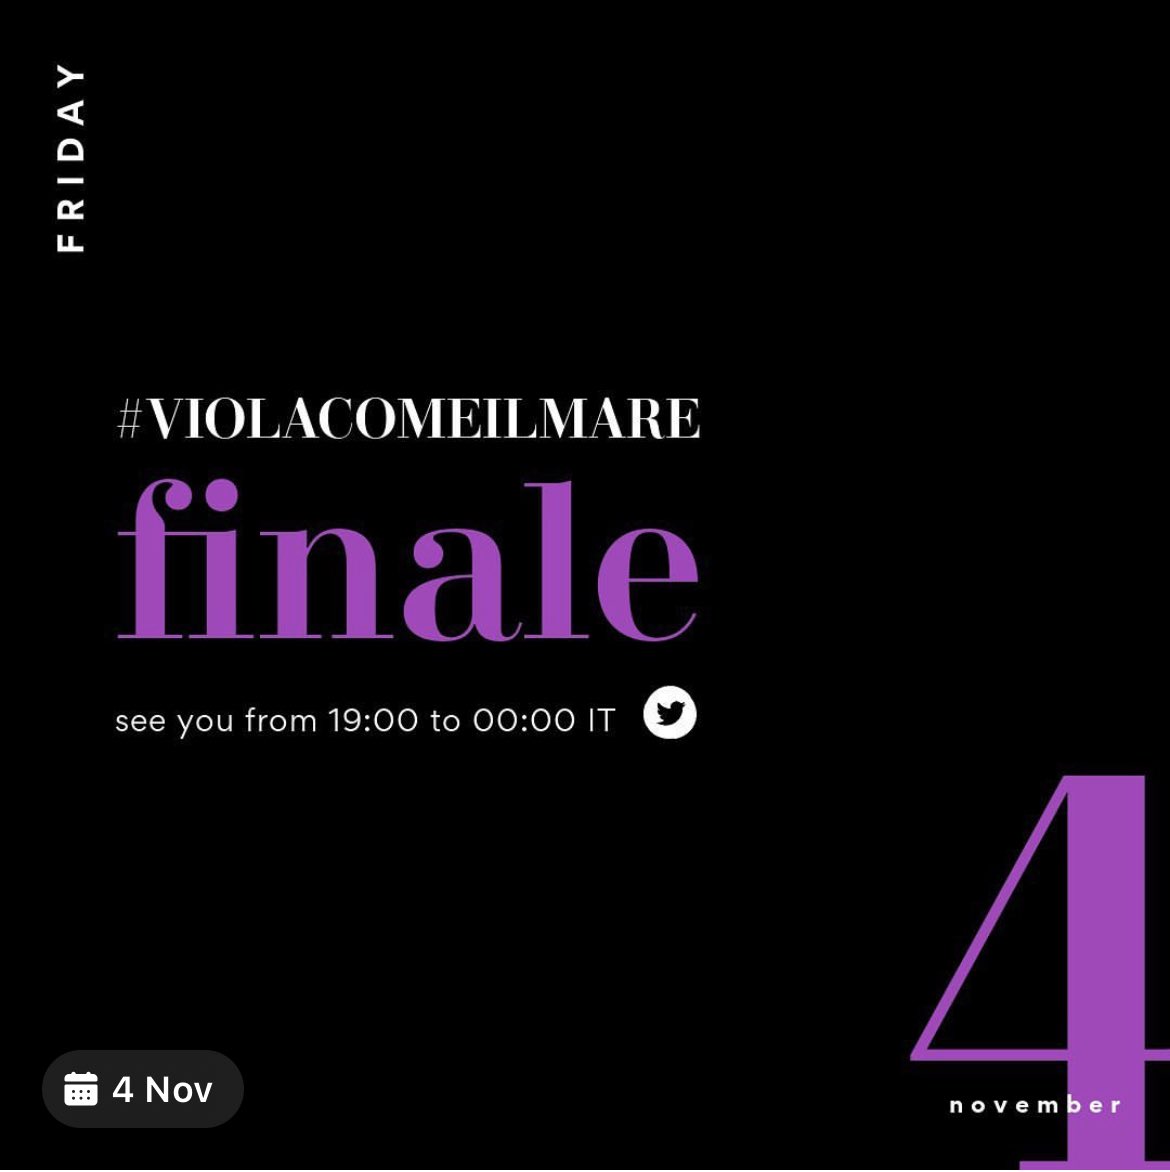 📌See you Friday 4th November 2022 at 19:00 to 00:00 on Twitter for Final episode of Viola Come Il Mare